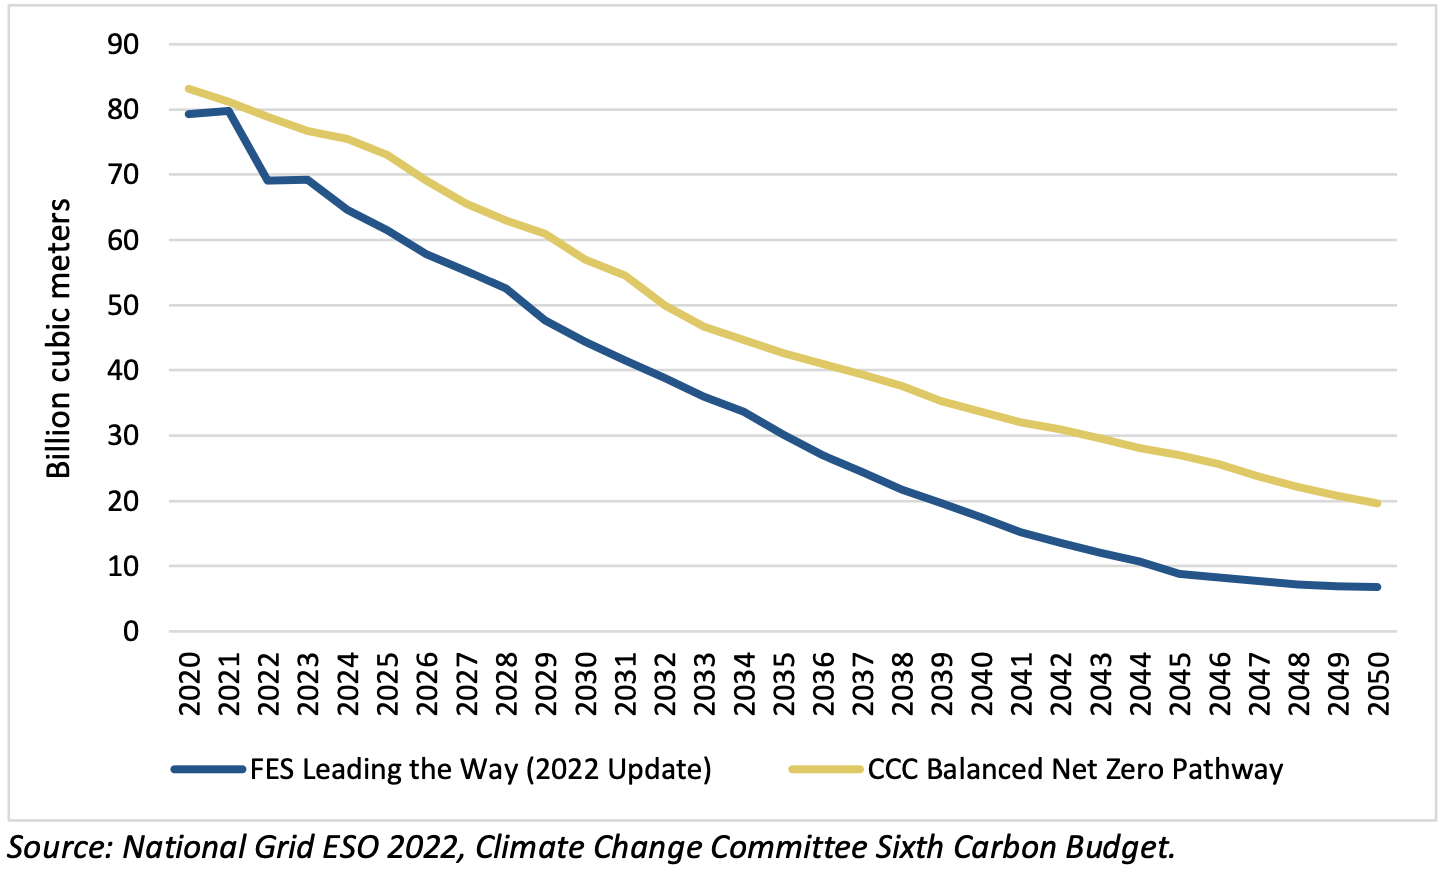 FES Leading the Way and CCC Balanced Net-Zero Pathway Gas Demand, 2020-2050 (bcm)